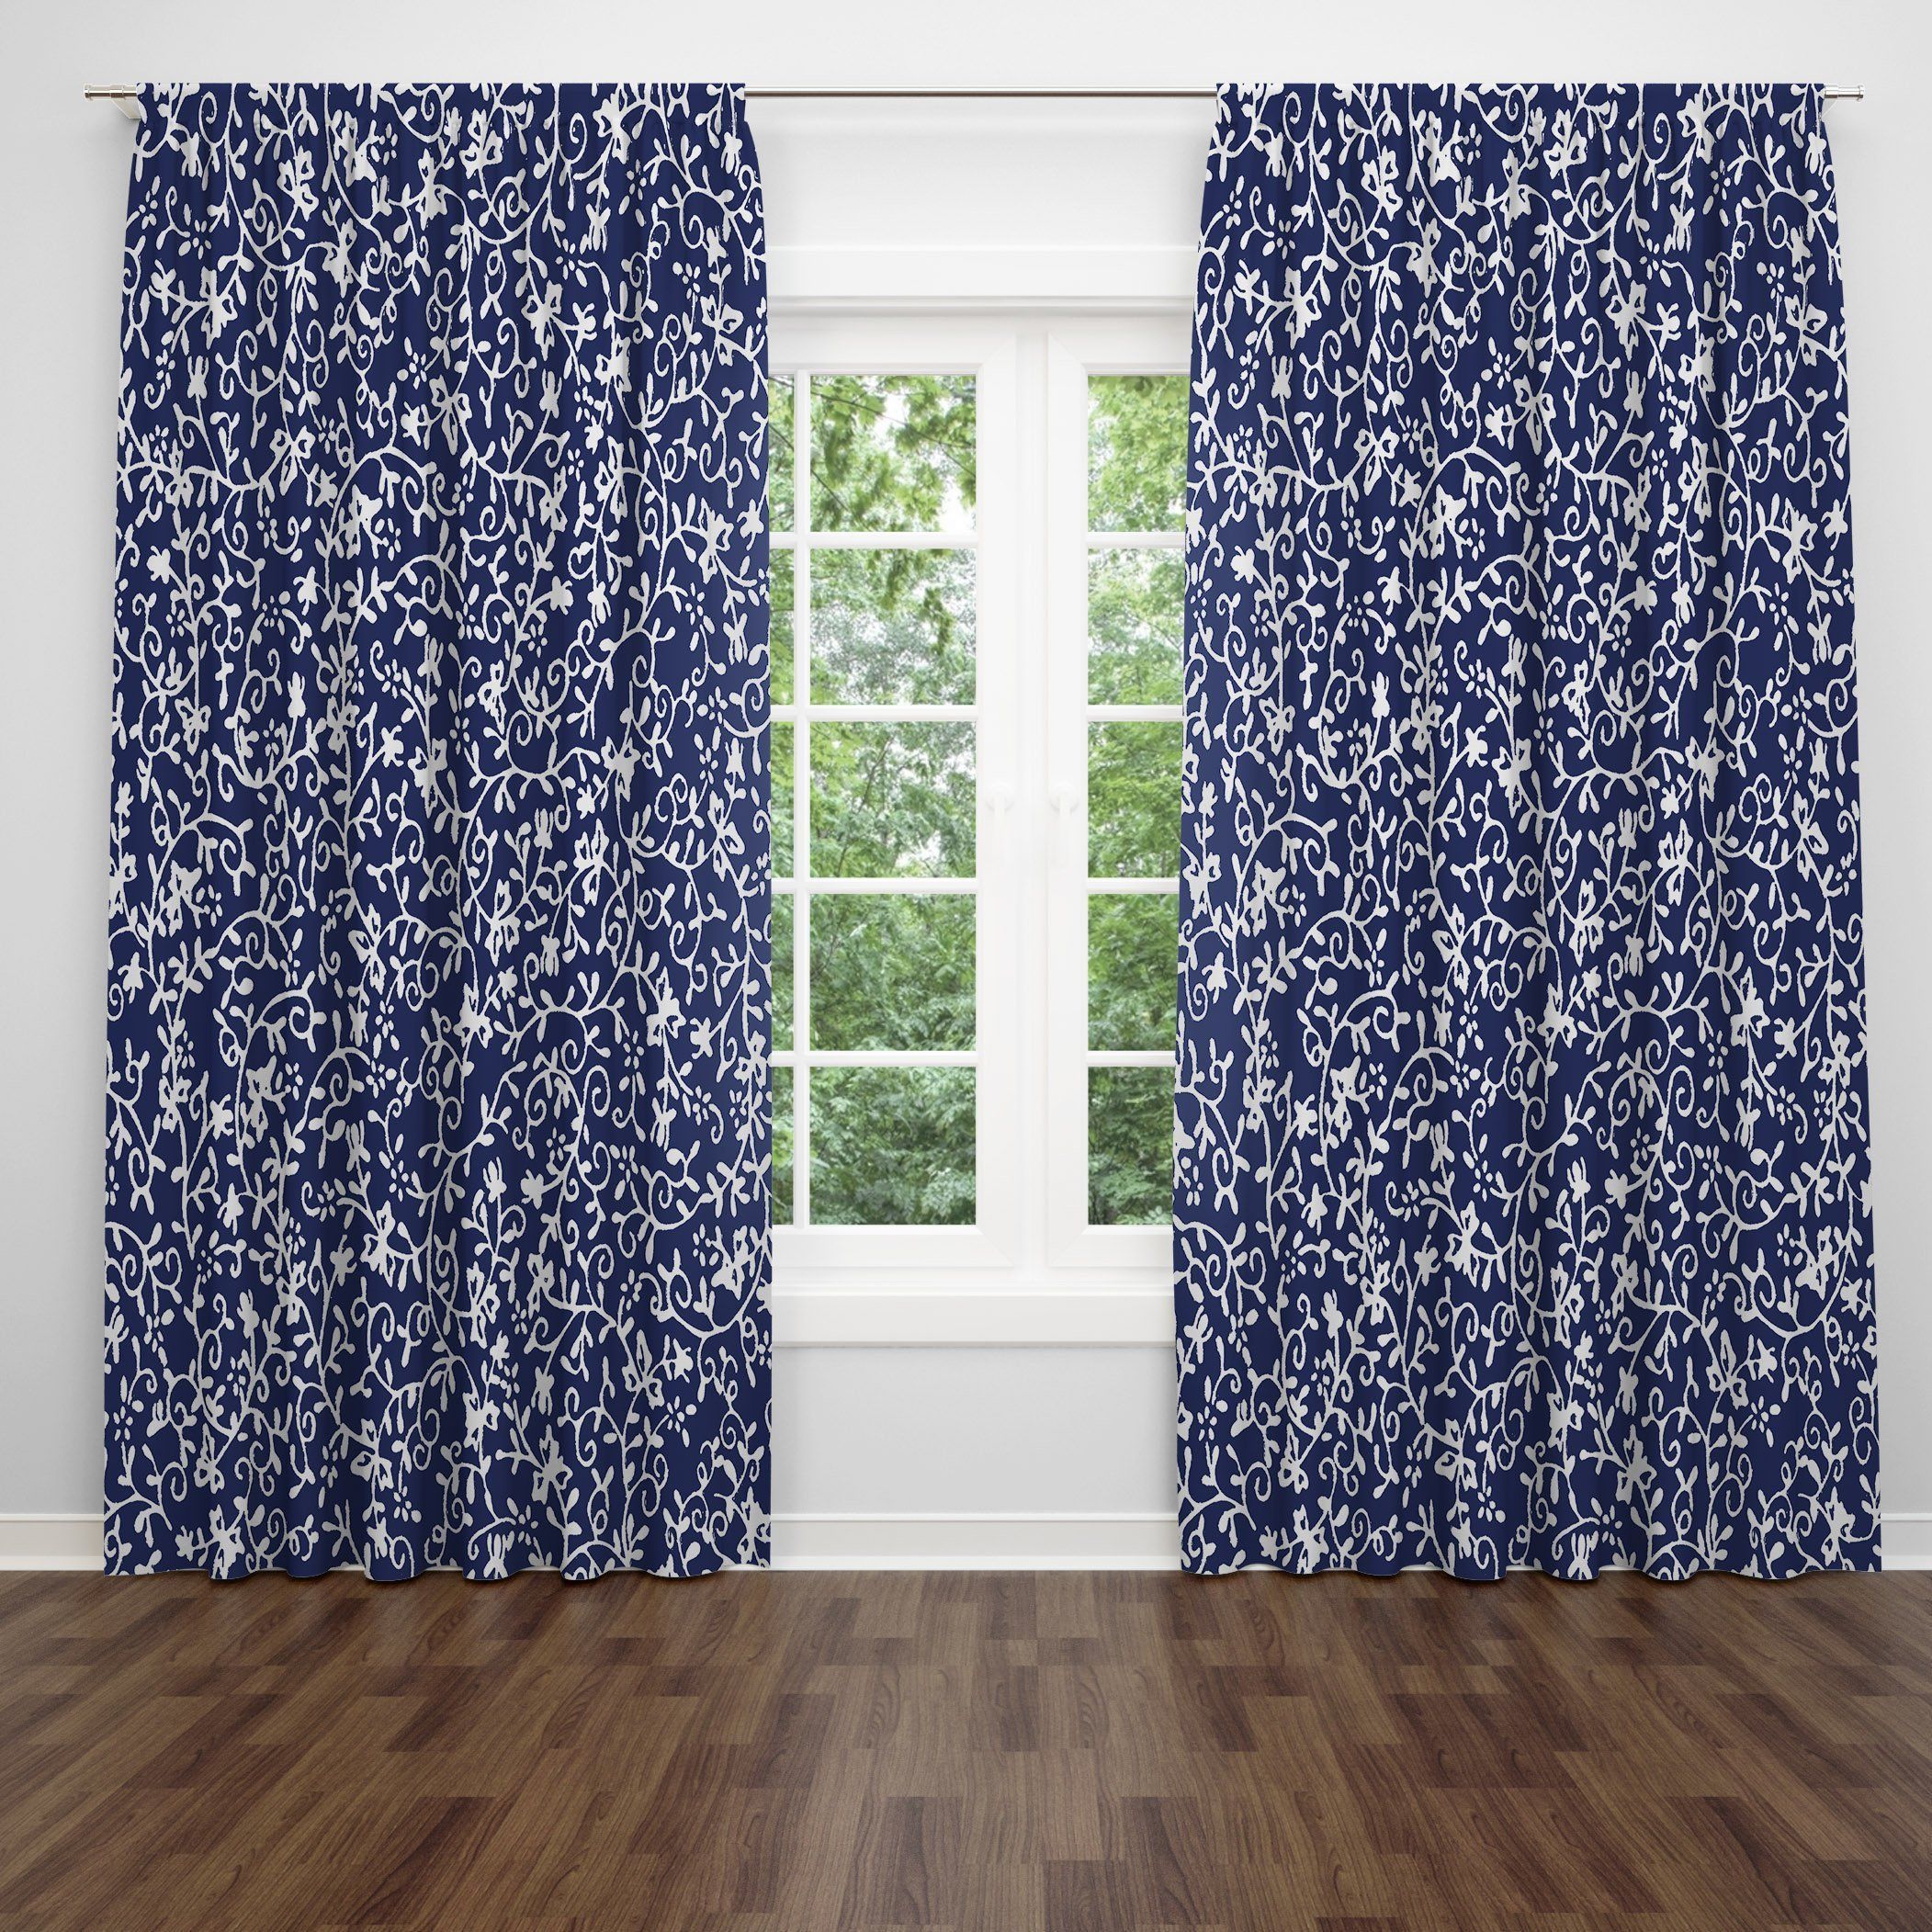 attractive navy blue white vines printed window curtains home decor 4675